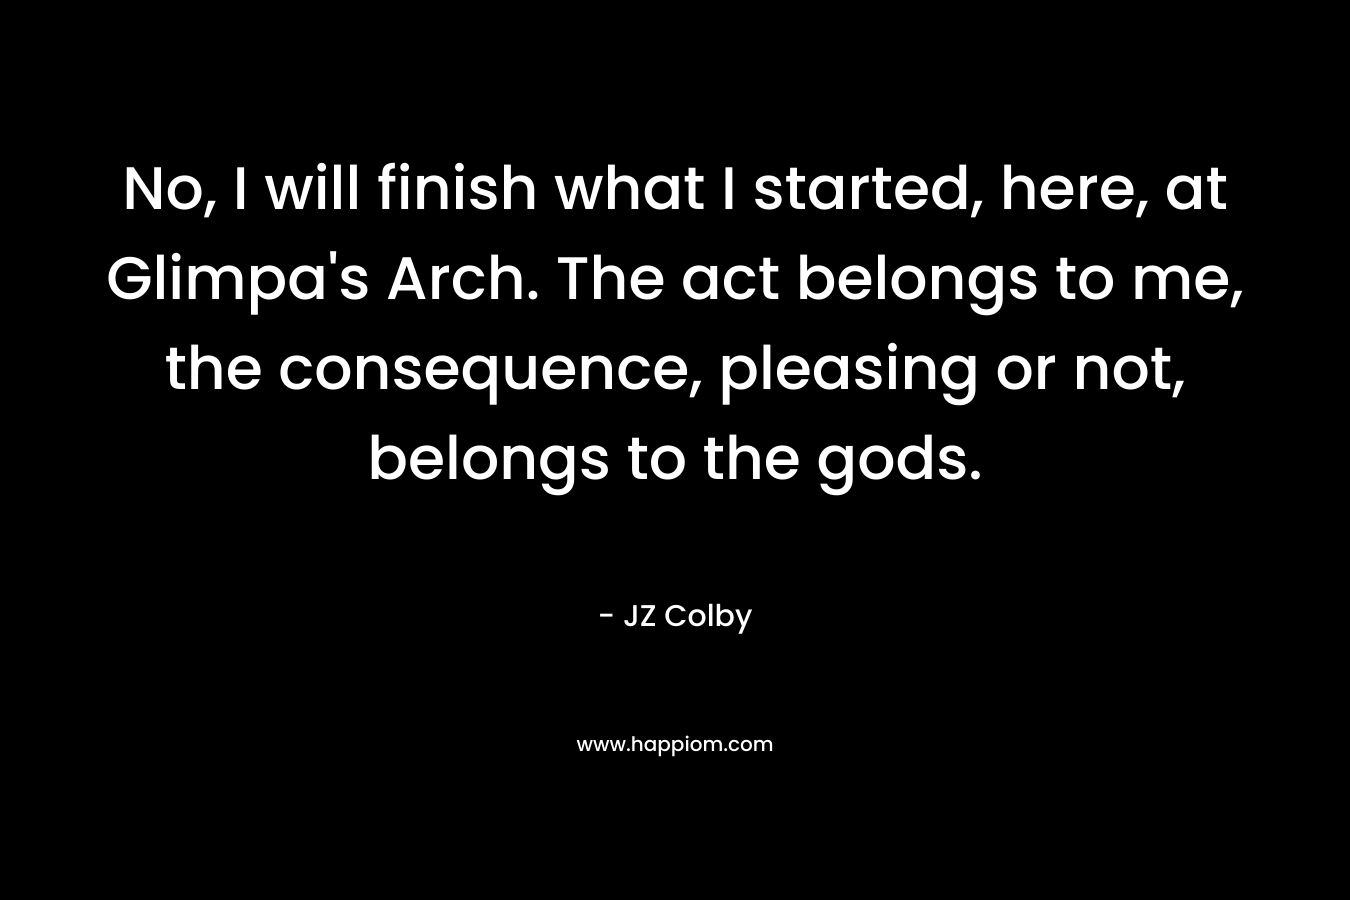 No, I will finish what I started, here, at Glimpa’s Arch. The act belongs to me, the consequence, pleasing or not, belongs to the gods. – JZ Colby